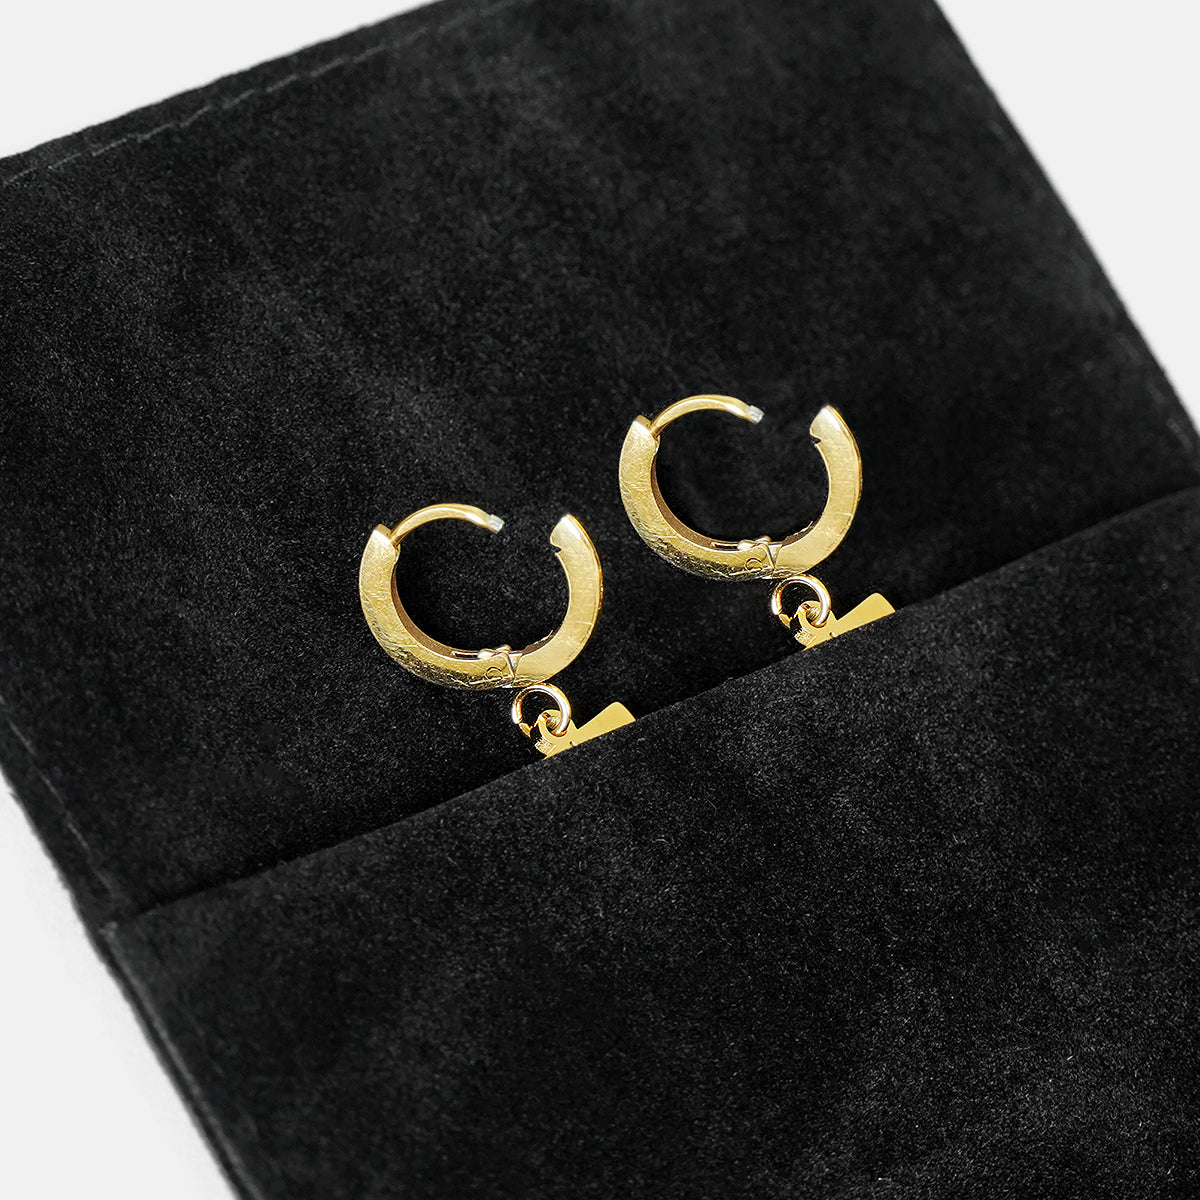 24 Number Earring - Gold Plated Stainless Steel